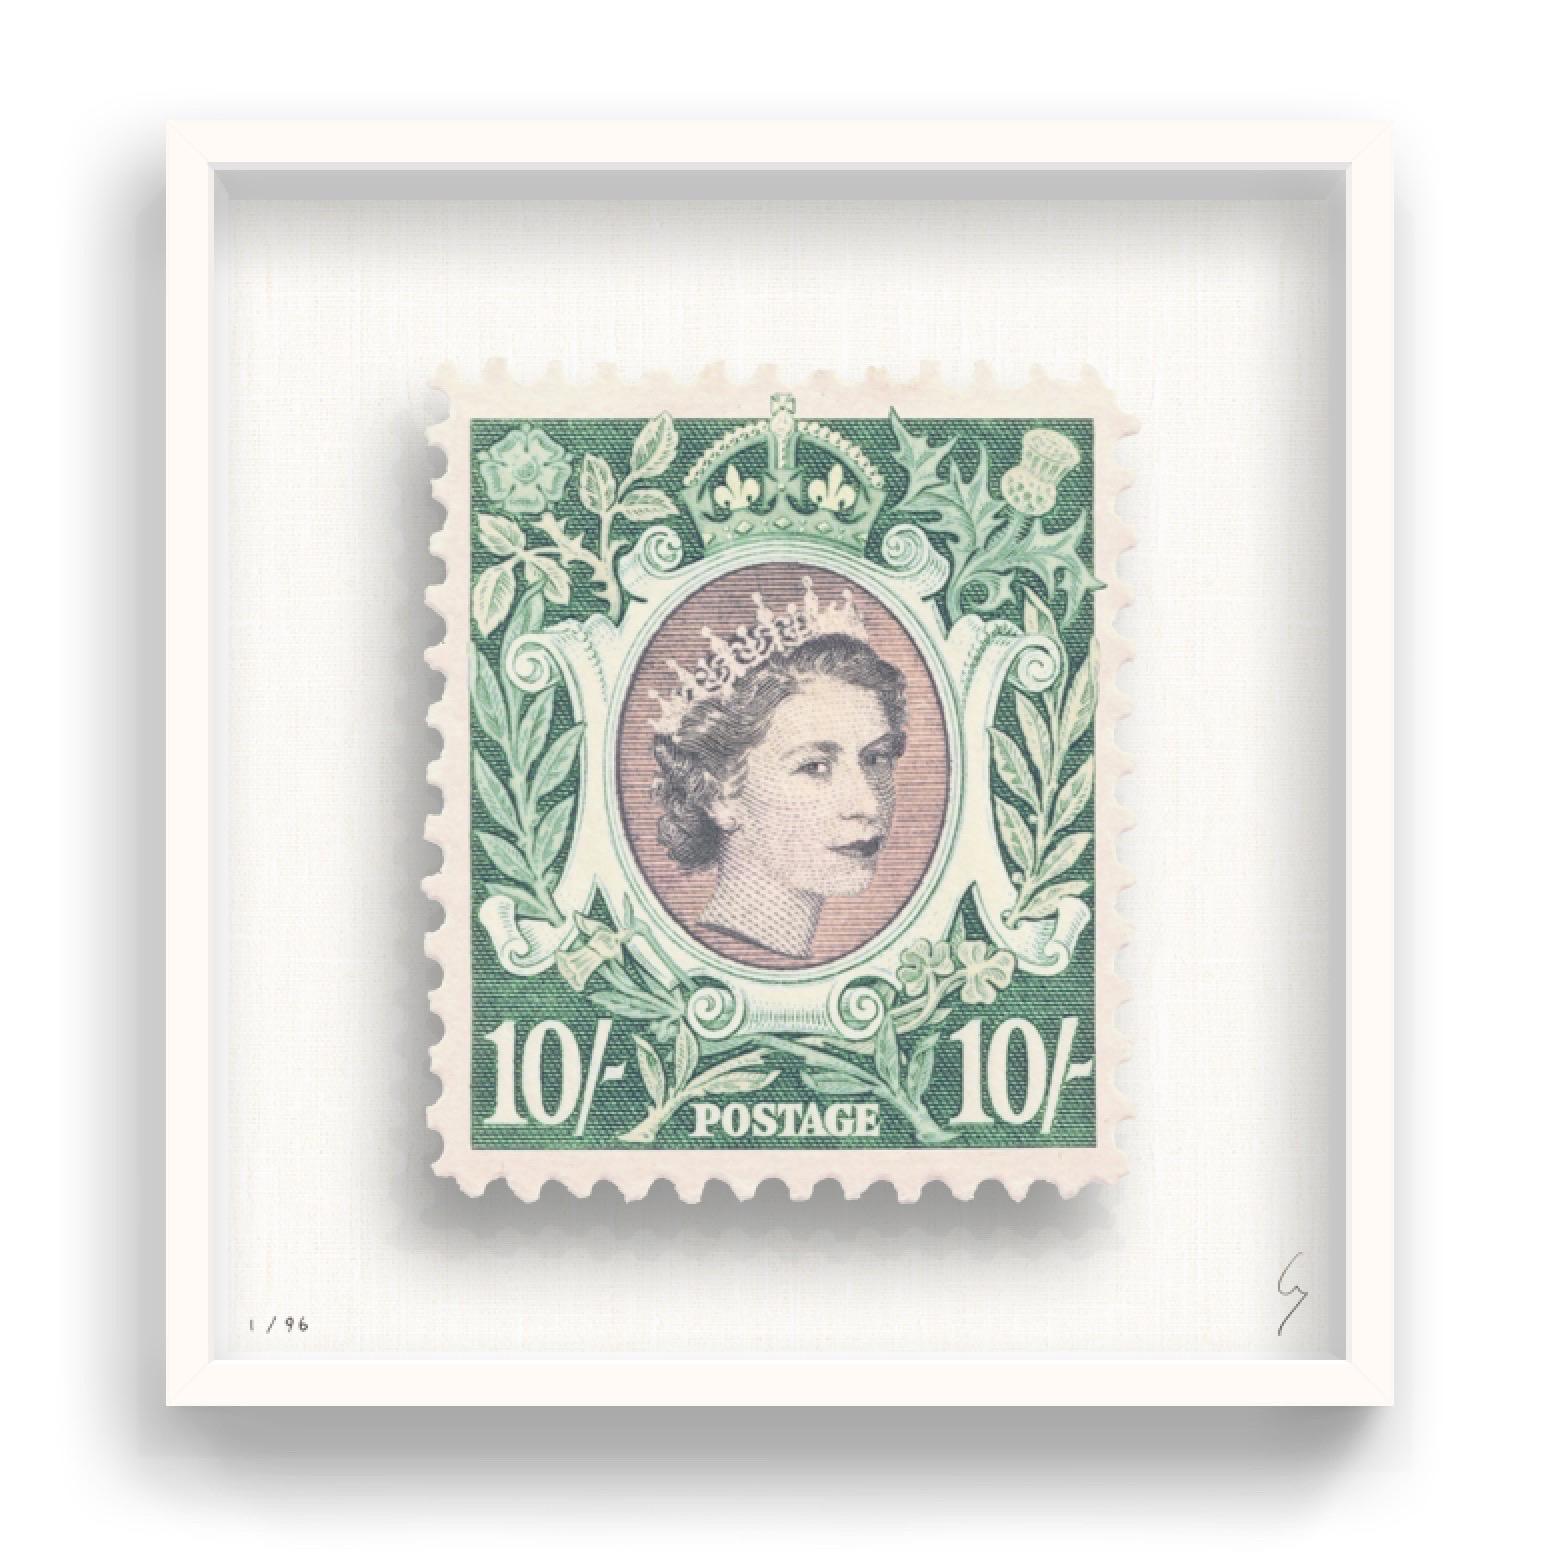 Guy Gee, Queen G (medium)

Hand-engraved print on 350gsm on G.F Smith card
53 x 56 cm (20 4/5 x 22 2/5)
Frame included 
Edition of 96

Each artwork by Guy had been digitally reimagined from an original postage stamp. Cut out and finished by hand,